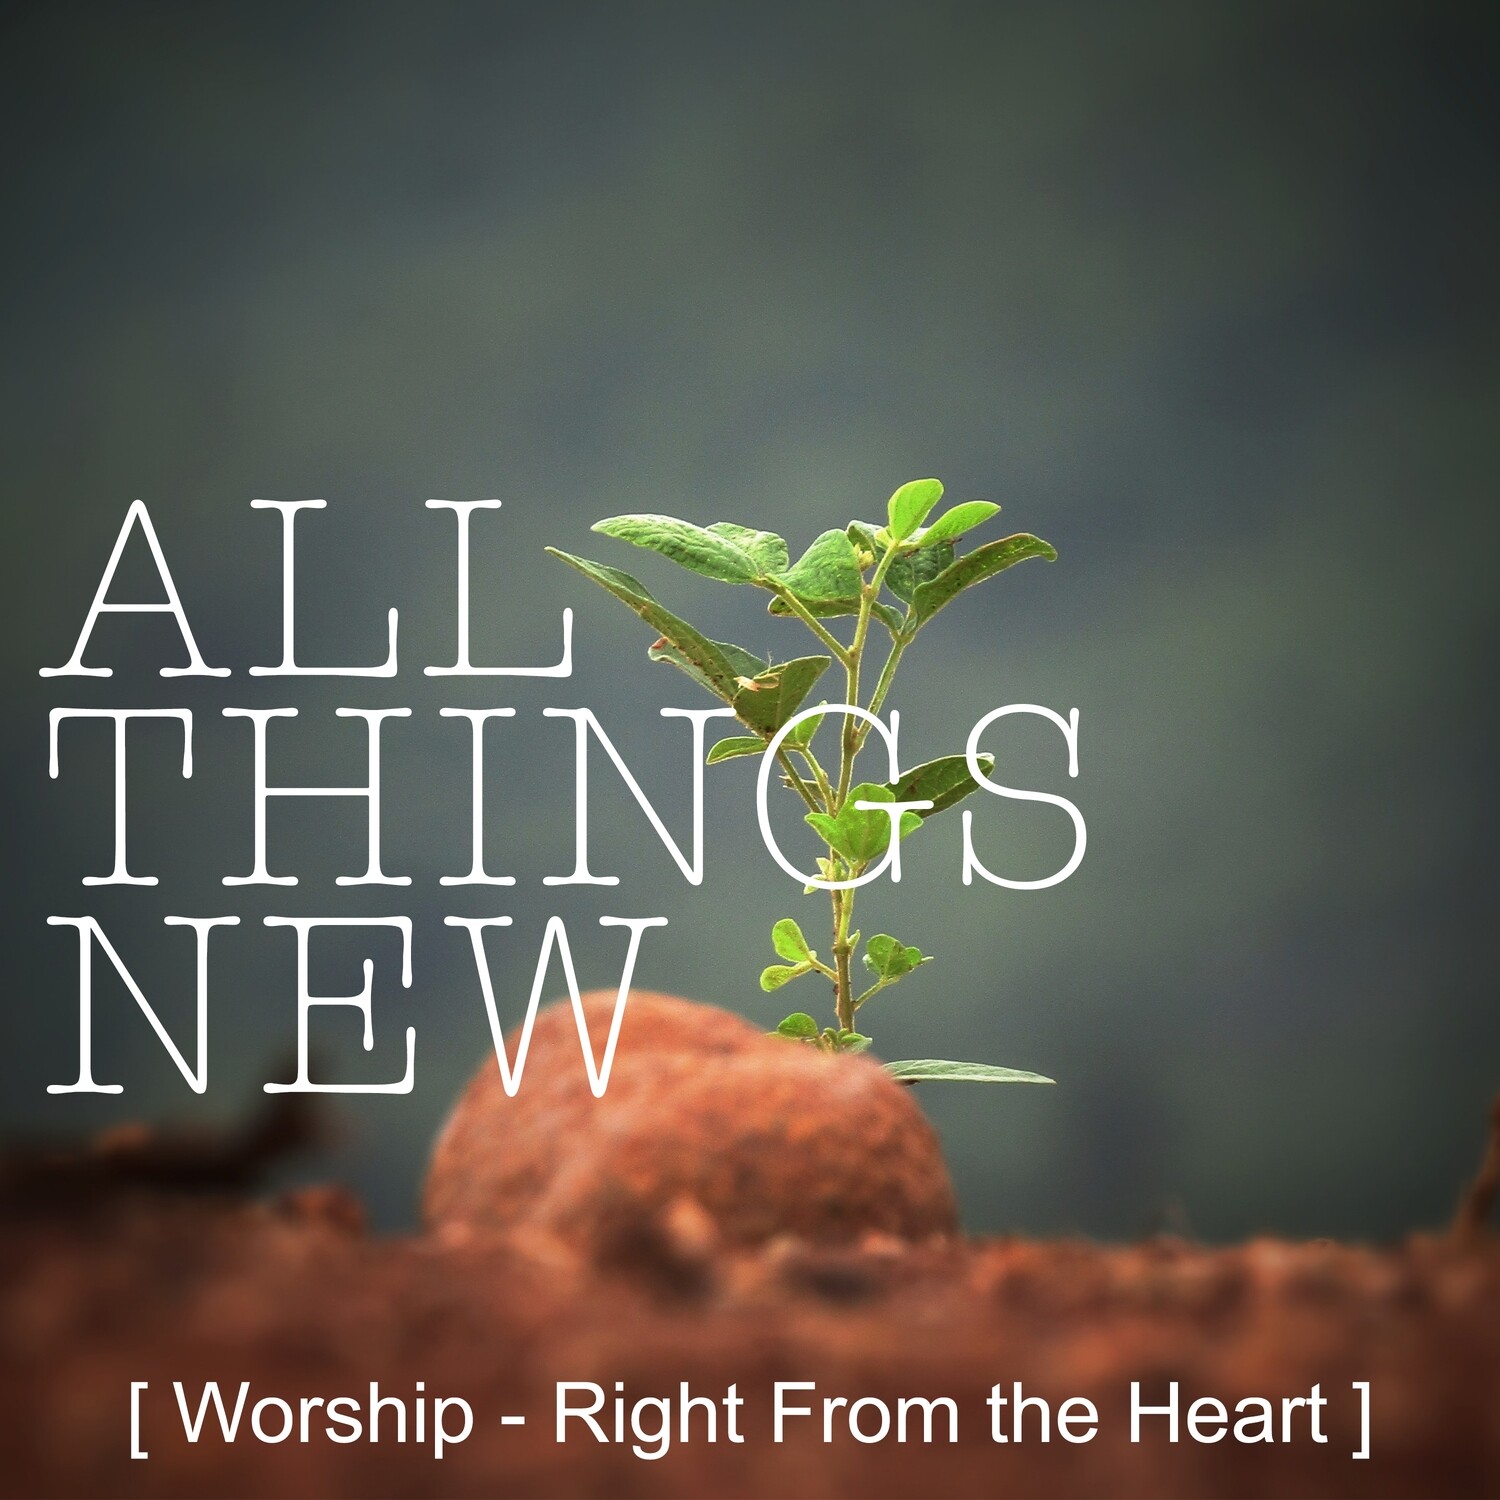 Worship - Right From the Heart